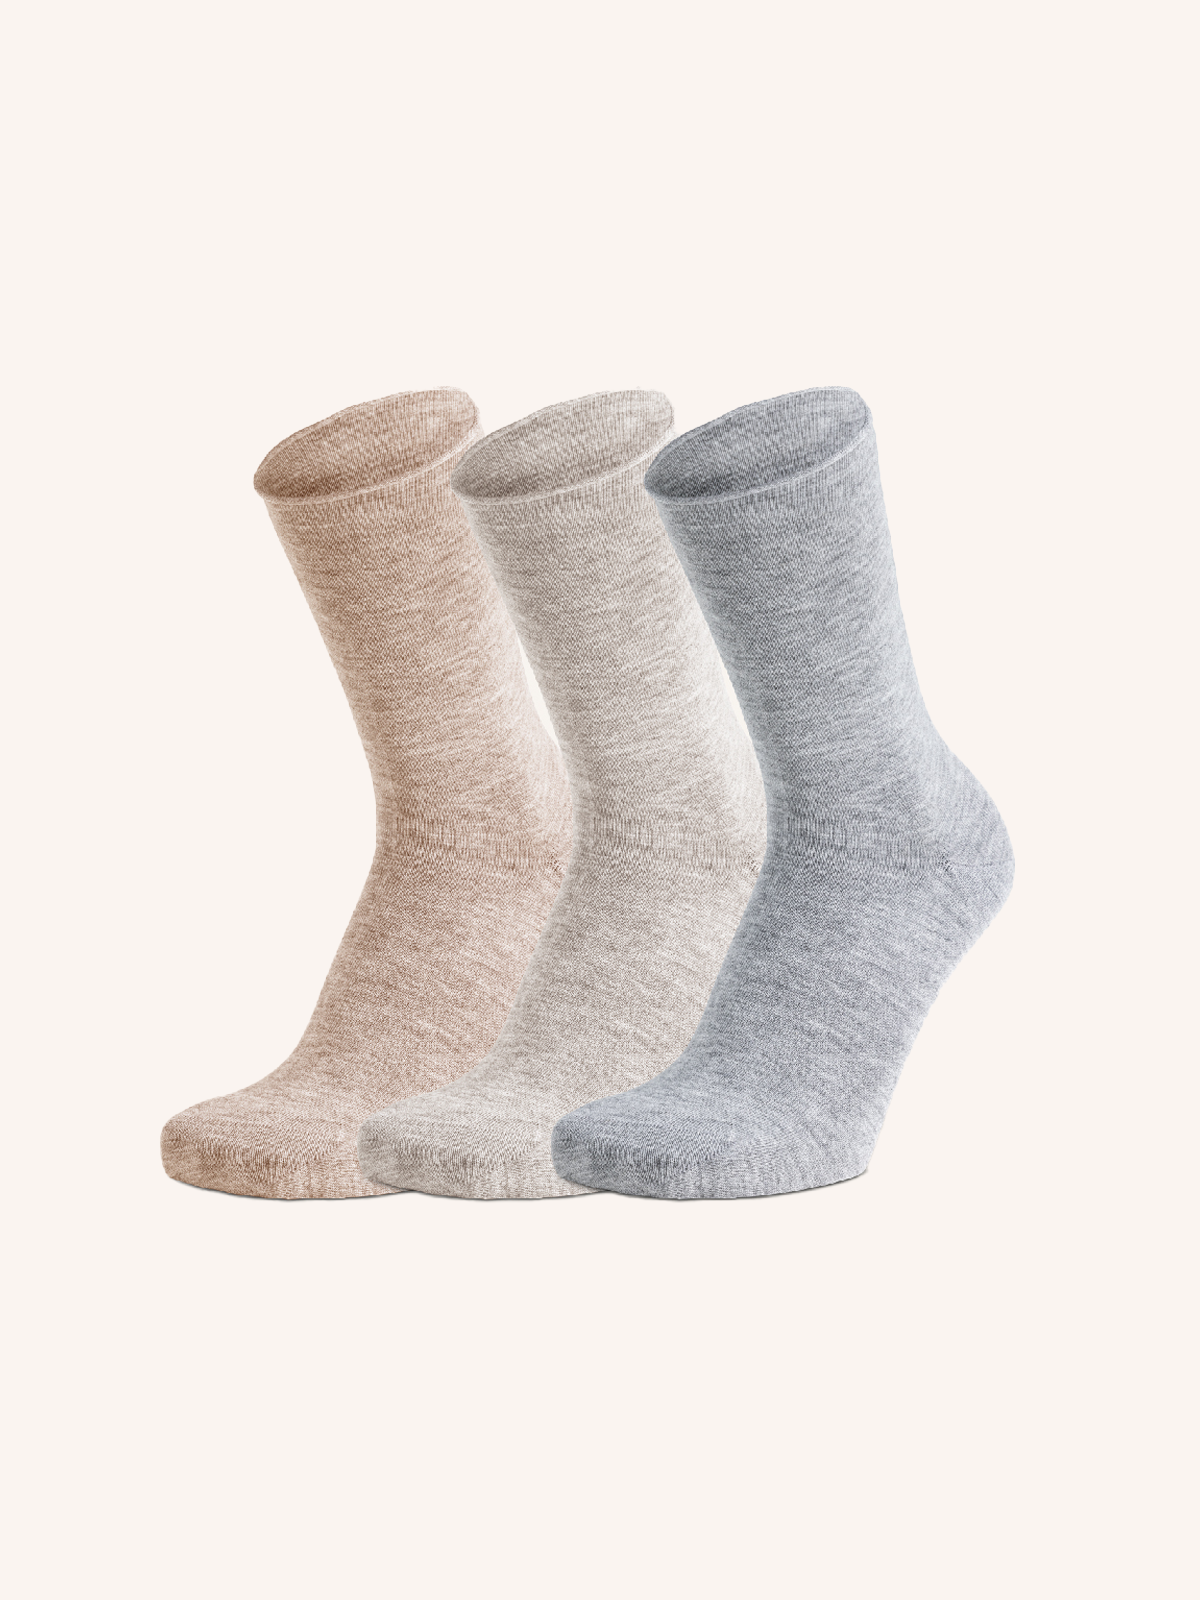 Short Socks in Cashmere and Viscose for Women | Plain Color | Pack of 3 Pairs | Ultra DC 